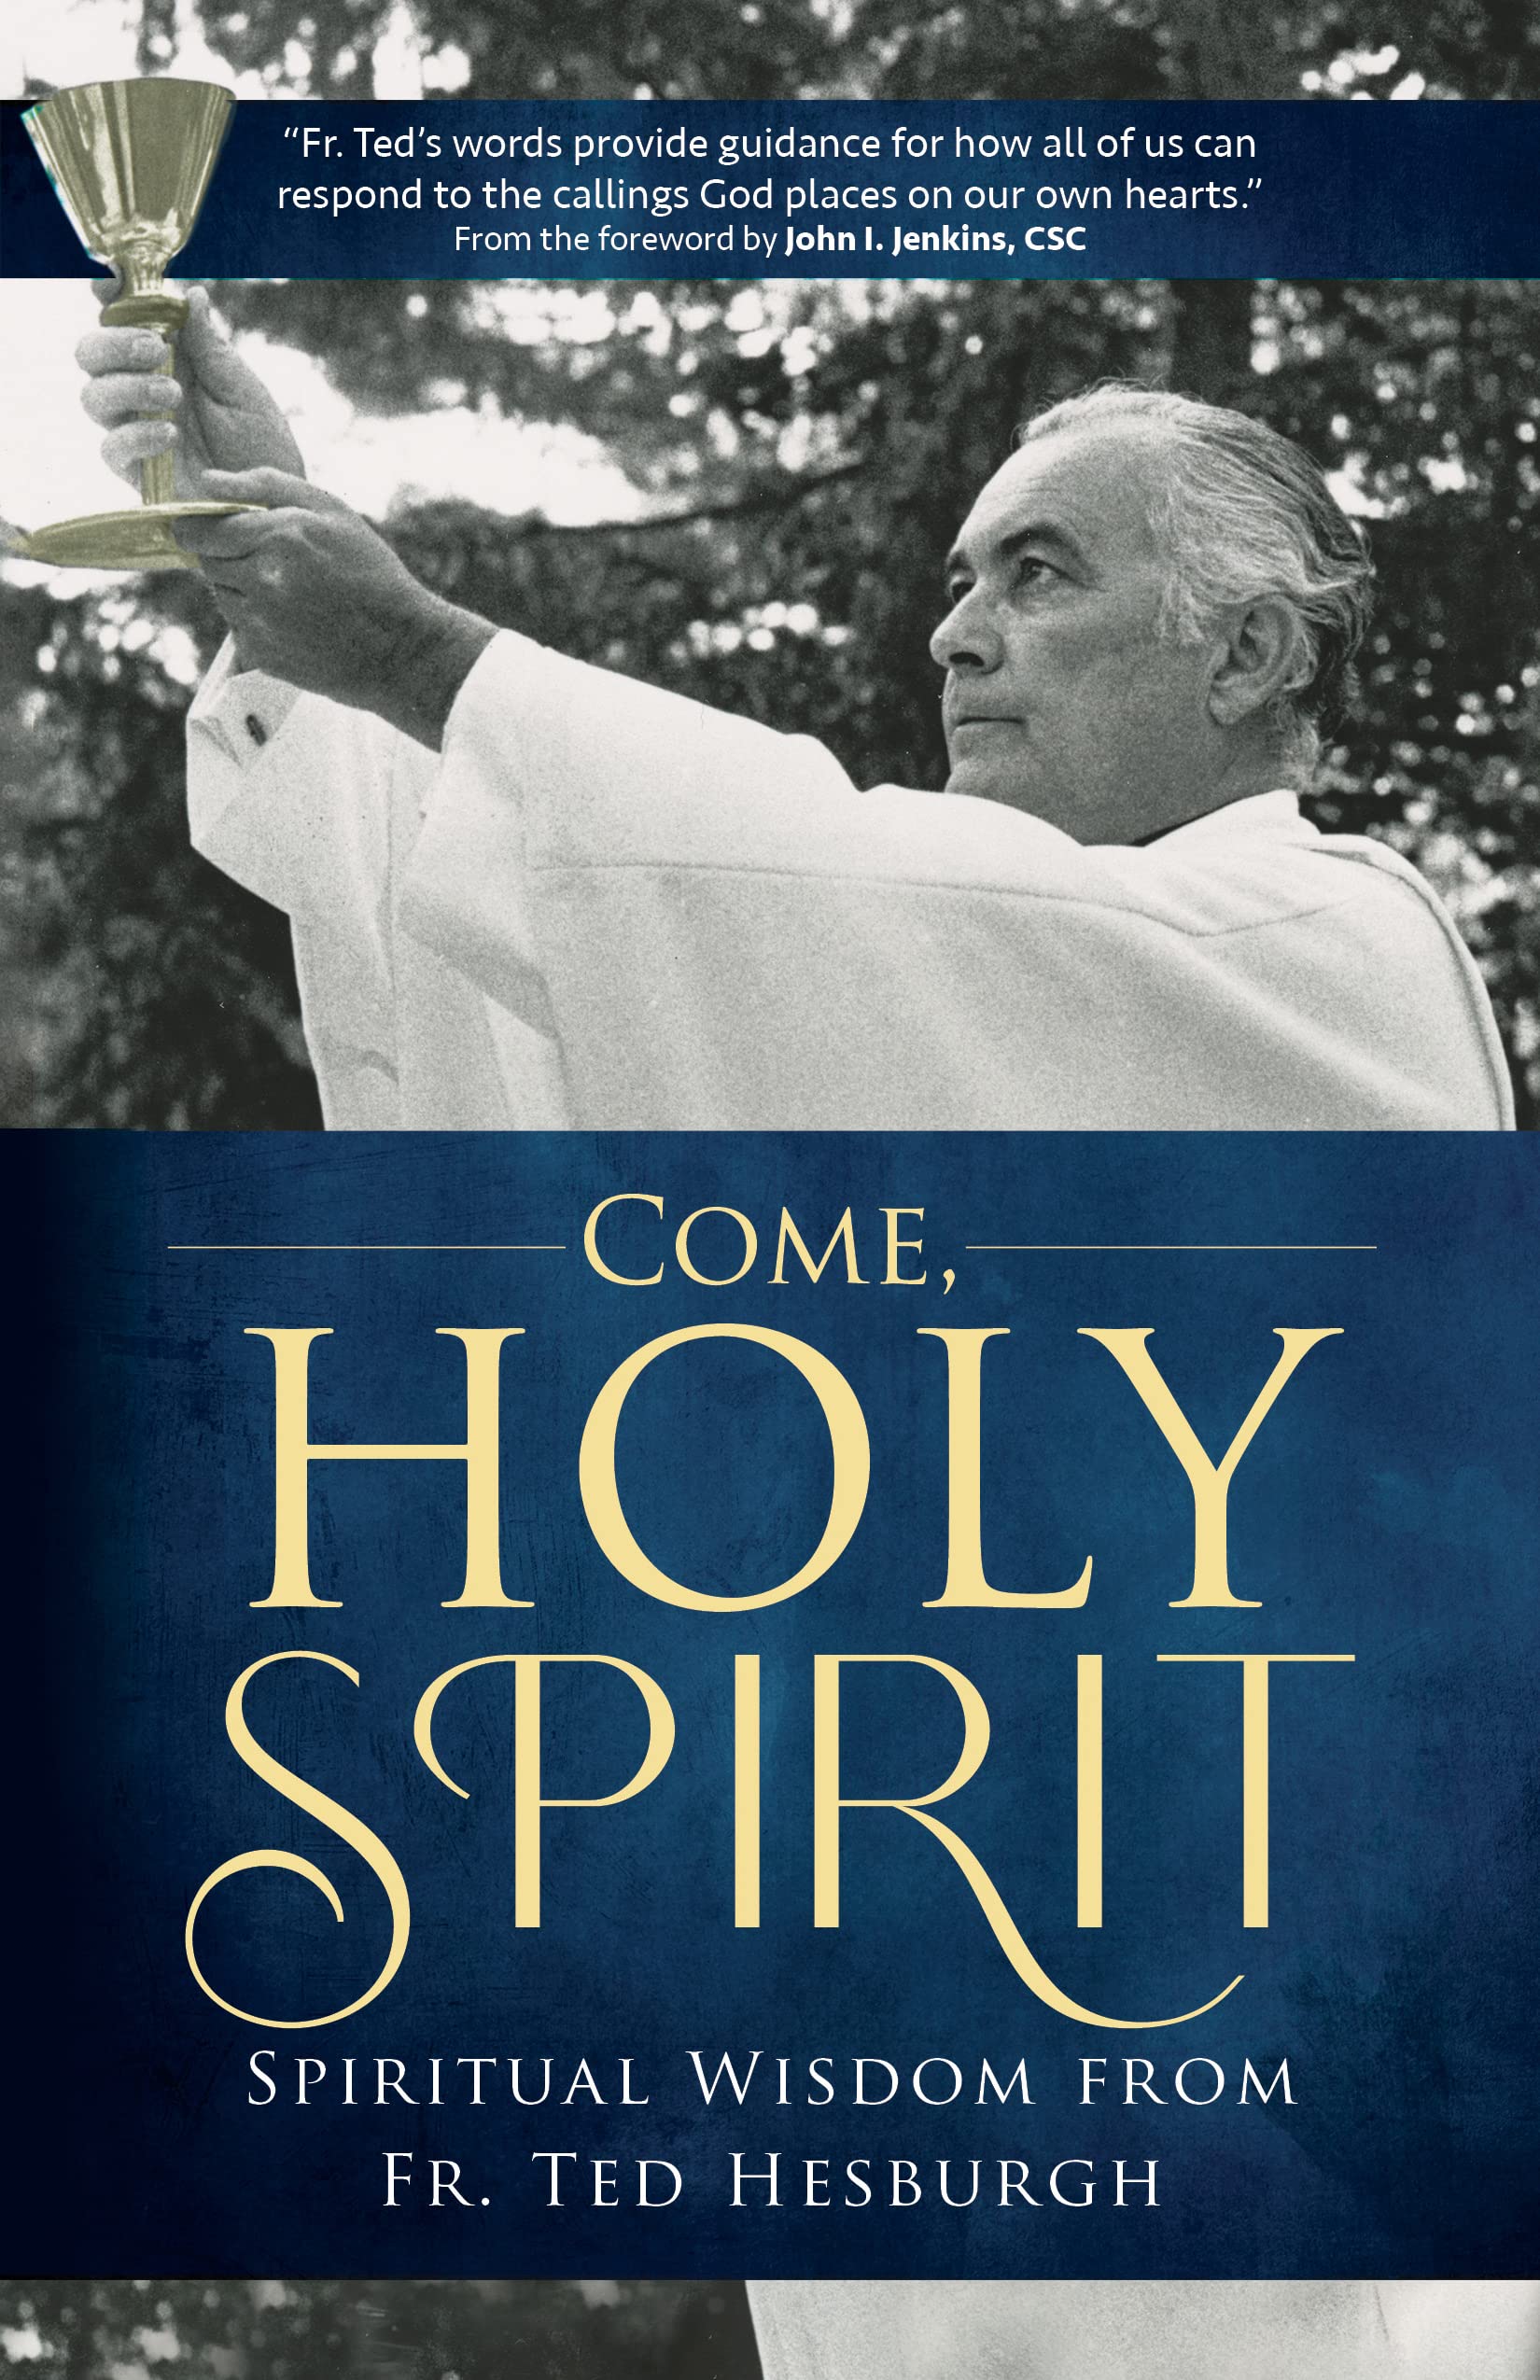 Come, Holy Spirit: Spiritual Wisdom from Fr. Ted Hesburg